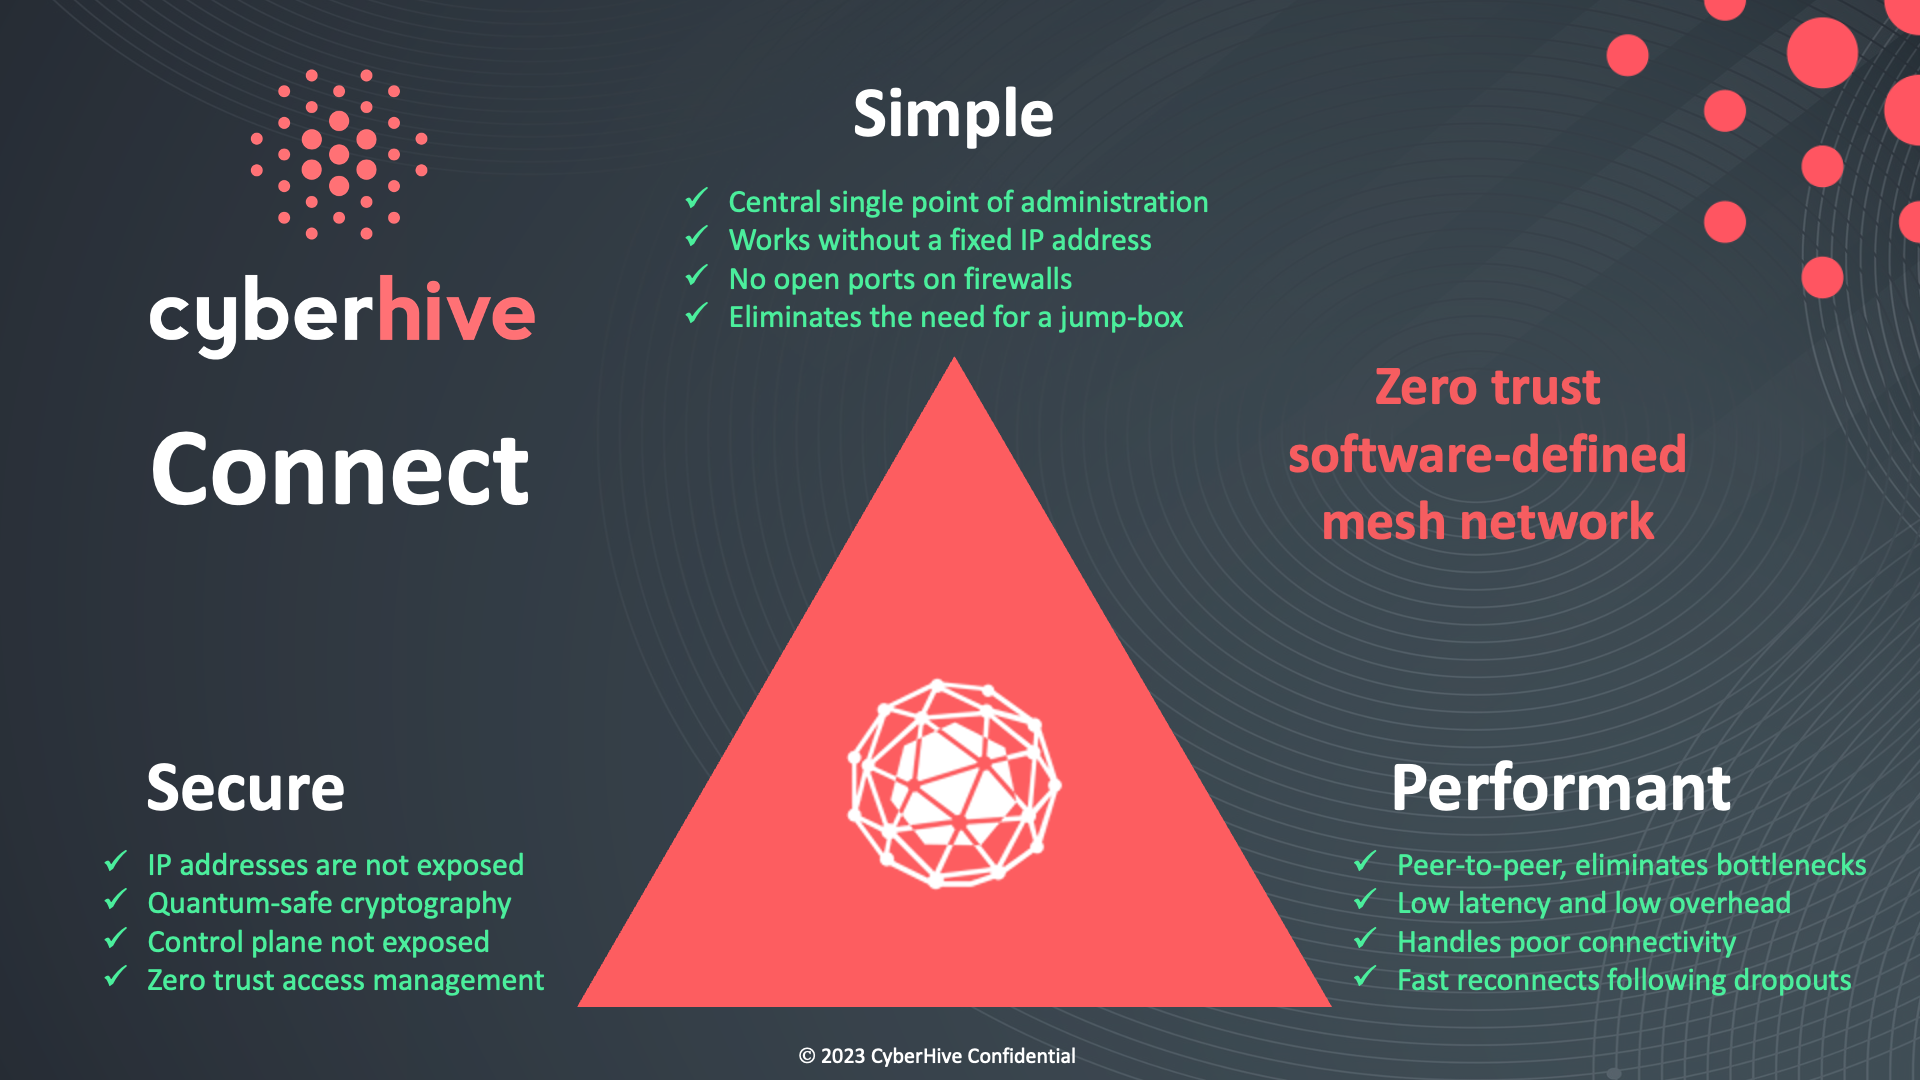 CyberHive Connect is simple, secure and performant